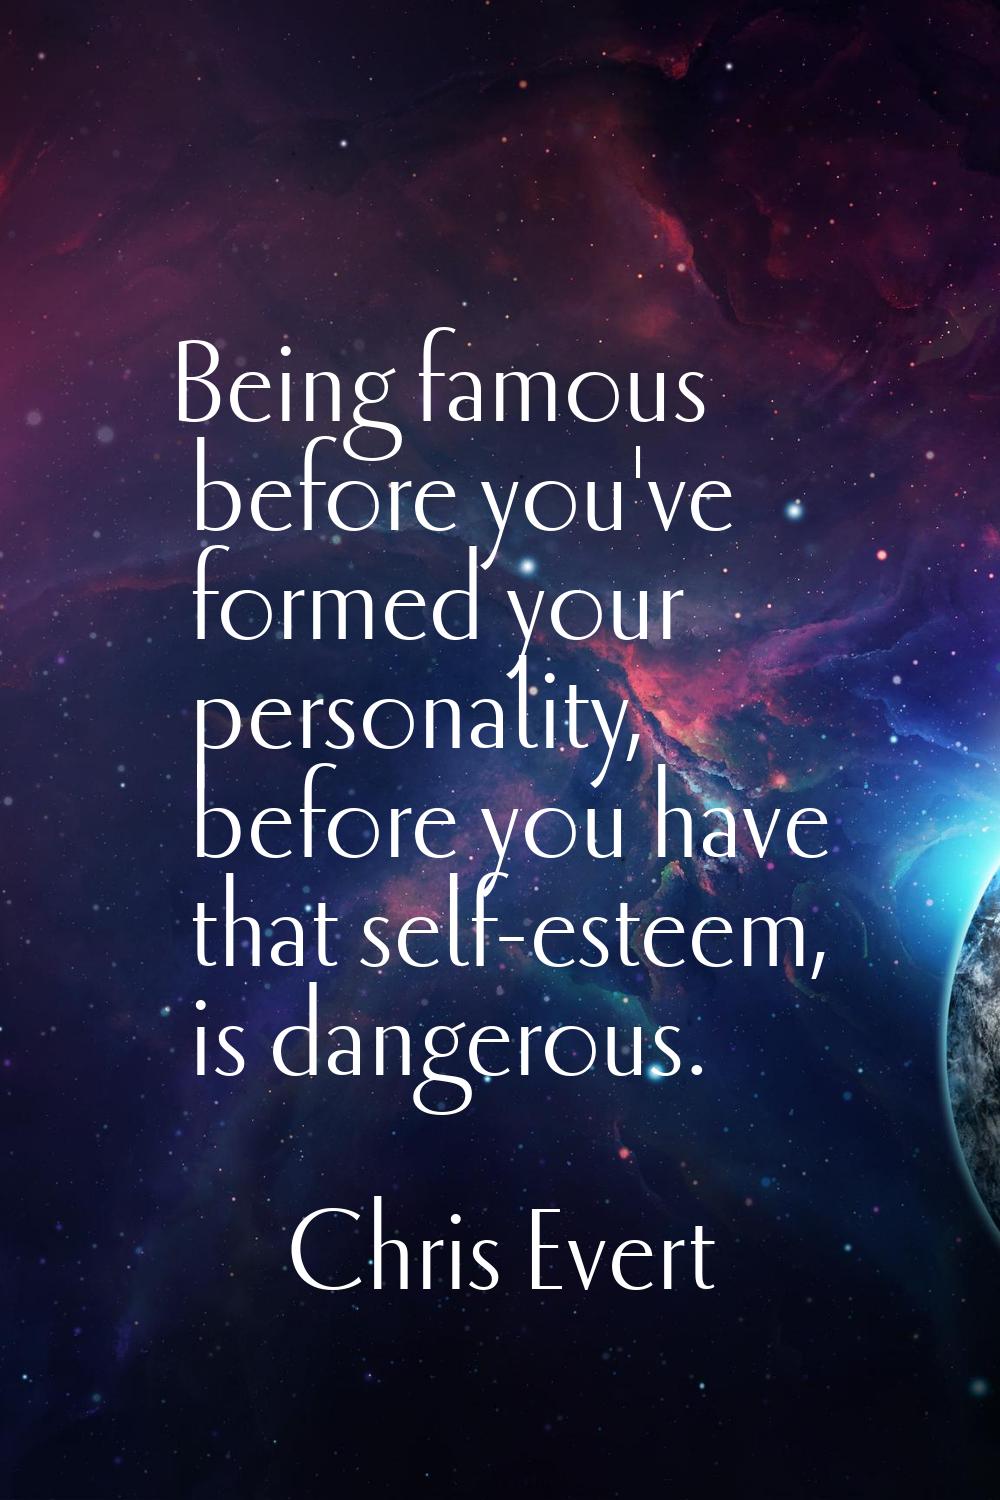 Being famous before you've formed your personality, before you have that self-esteem, is dangerous.